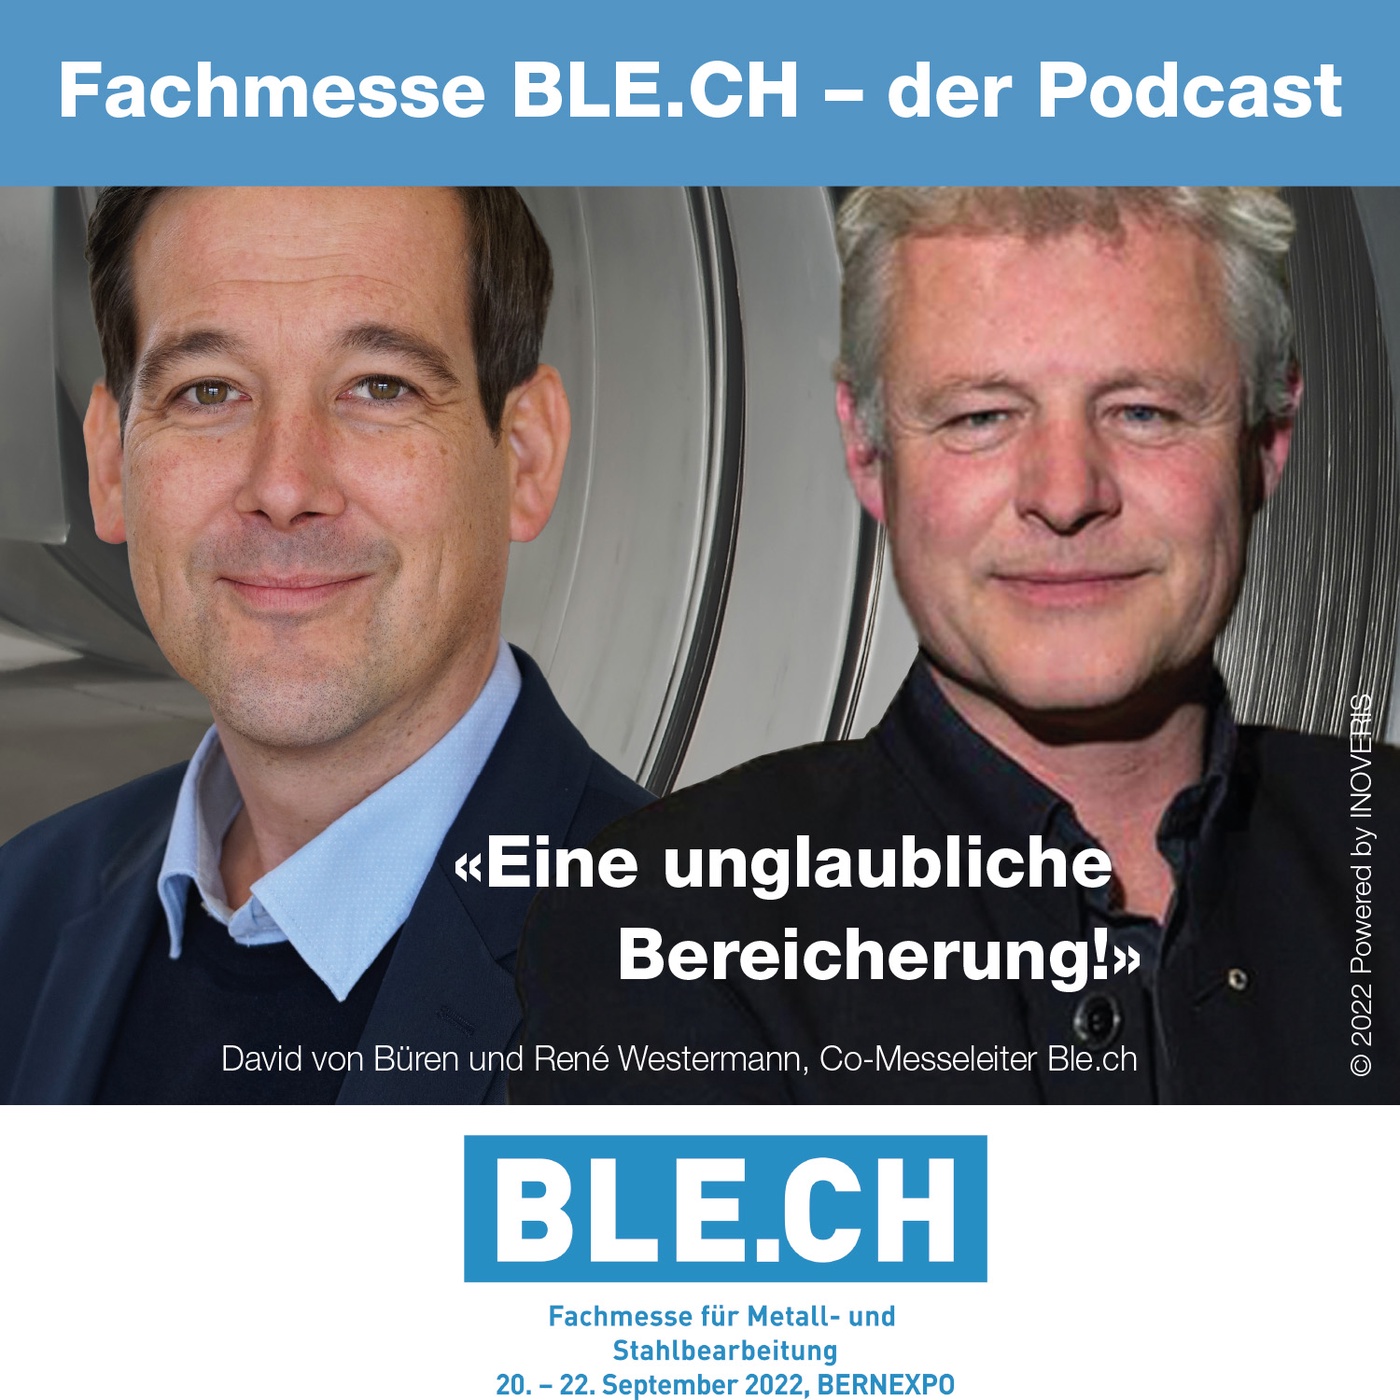 Fachmesse BLE.CH - der Podcast